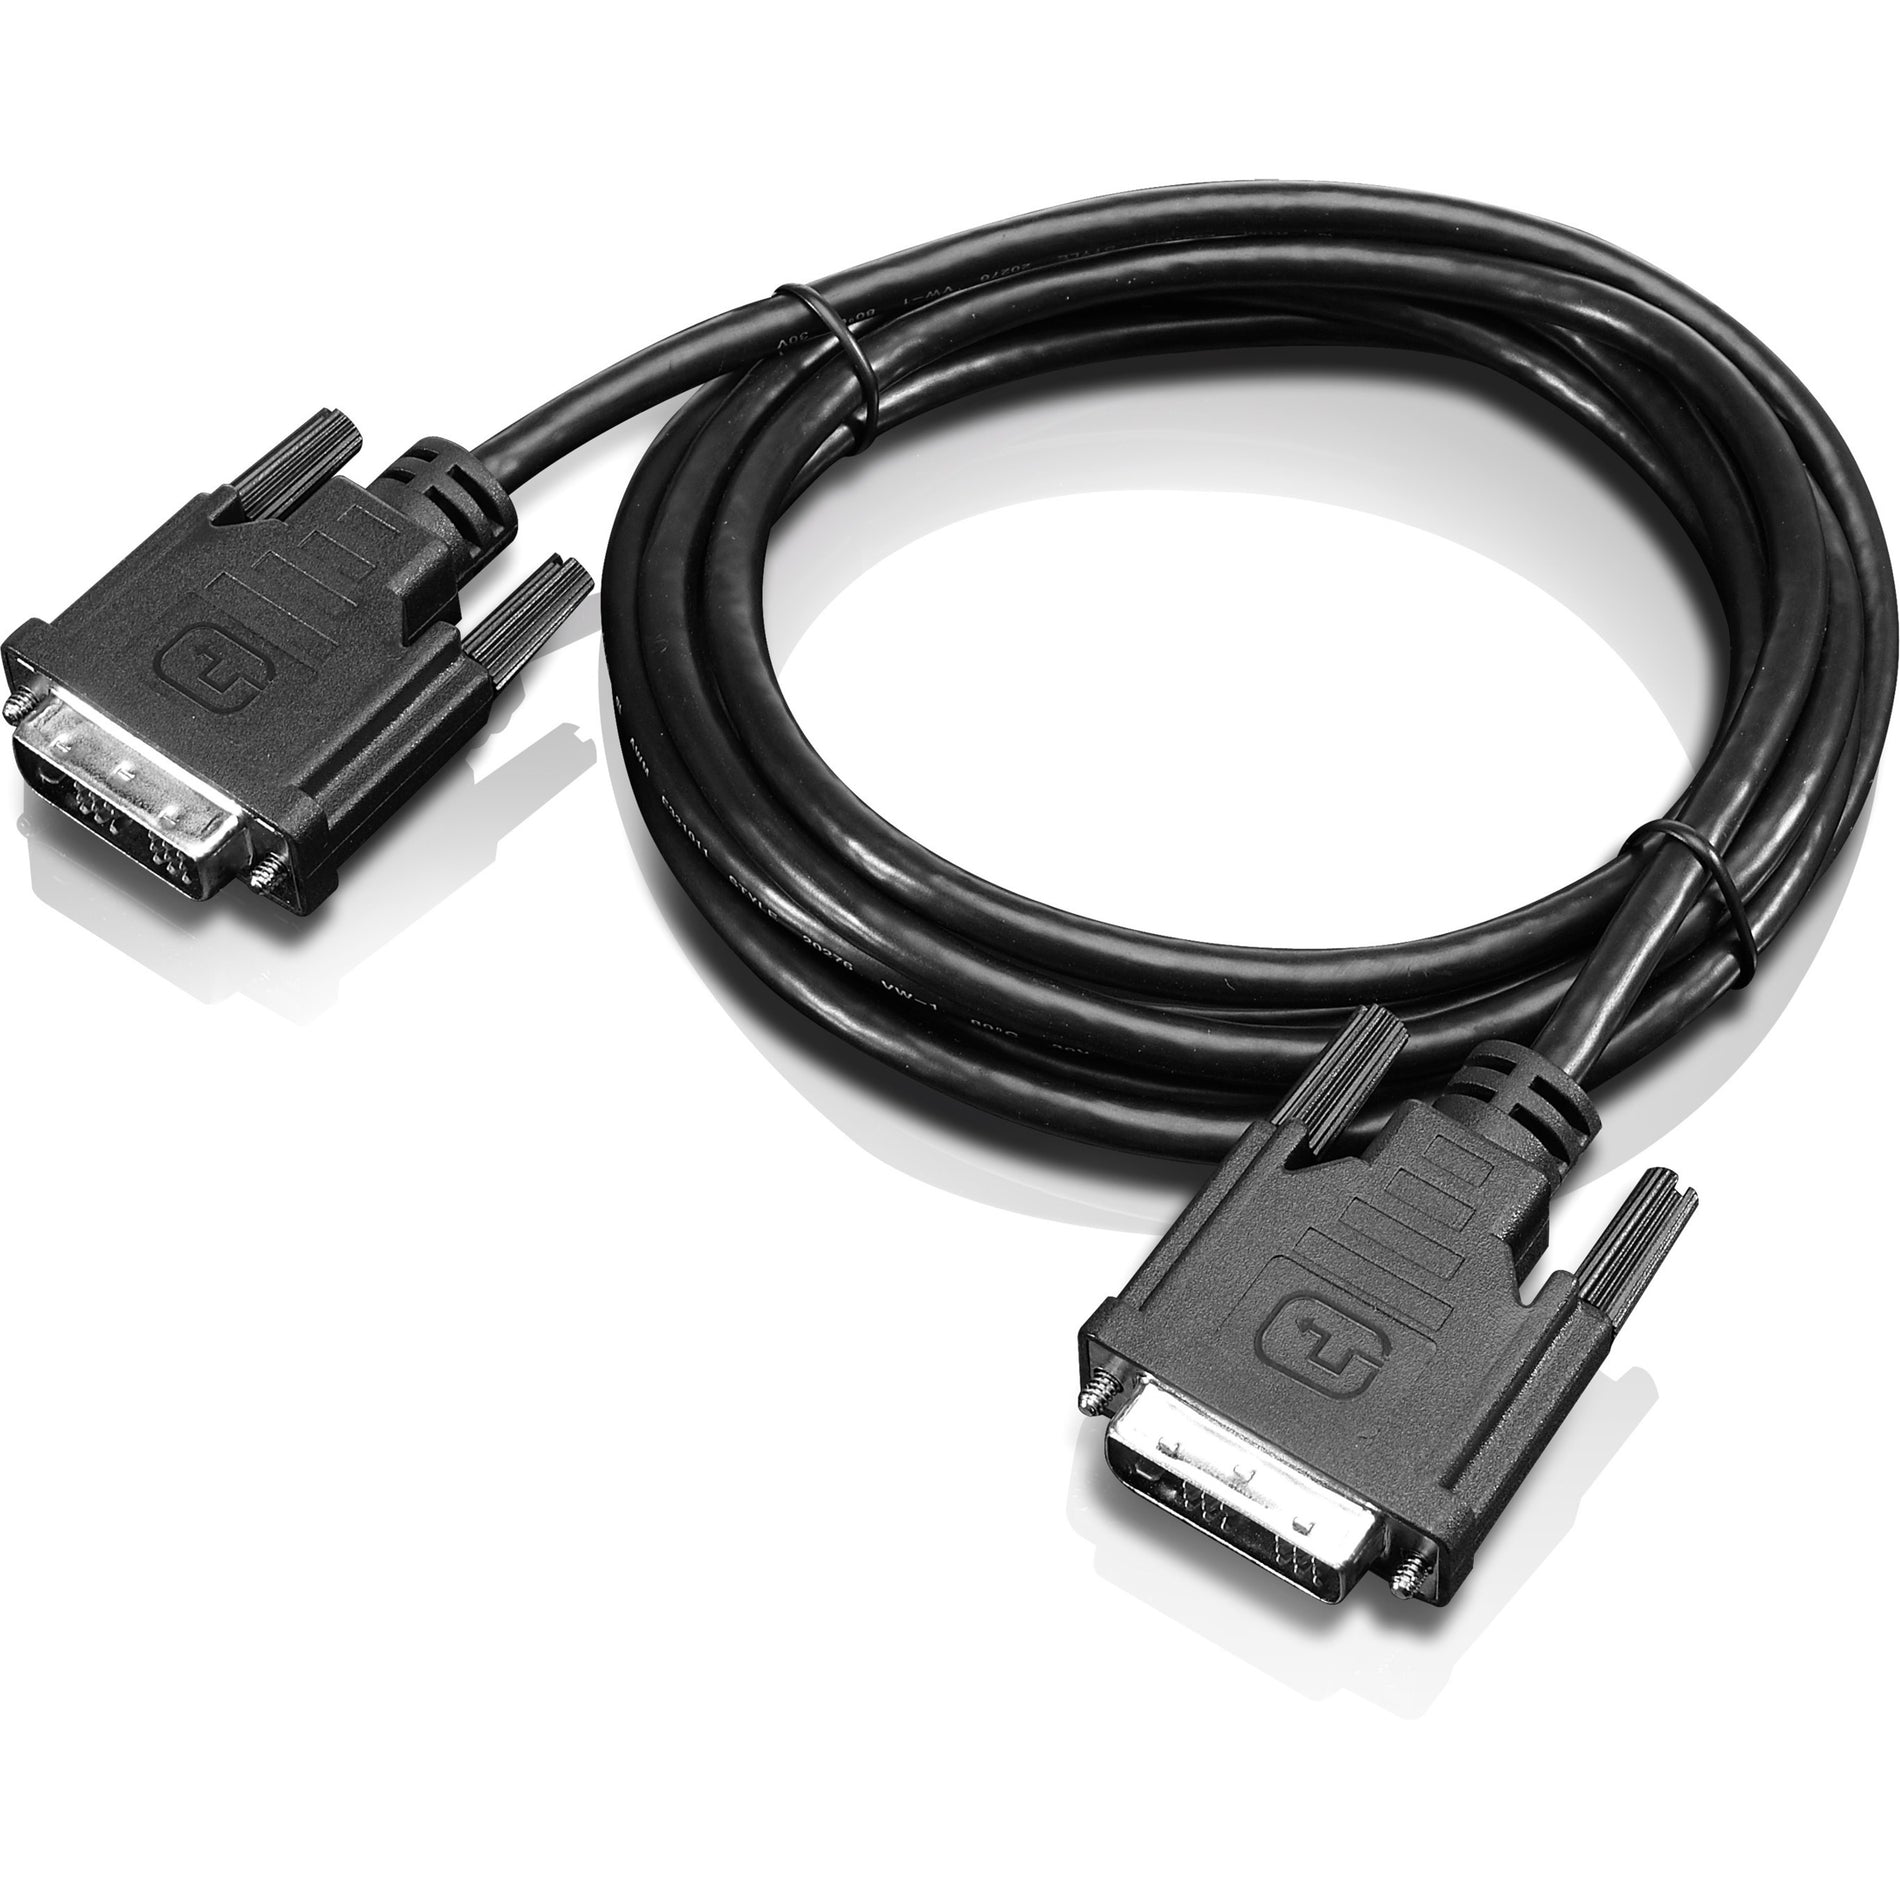 Lenovo 4X91D96900 HDMI Audio/Video Cable, High-Quality Digital Connection